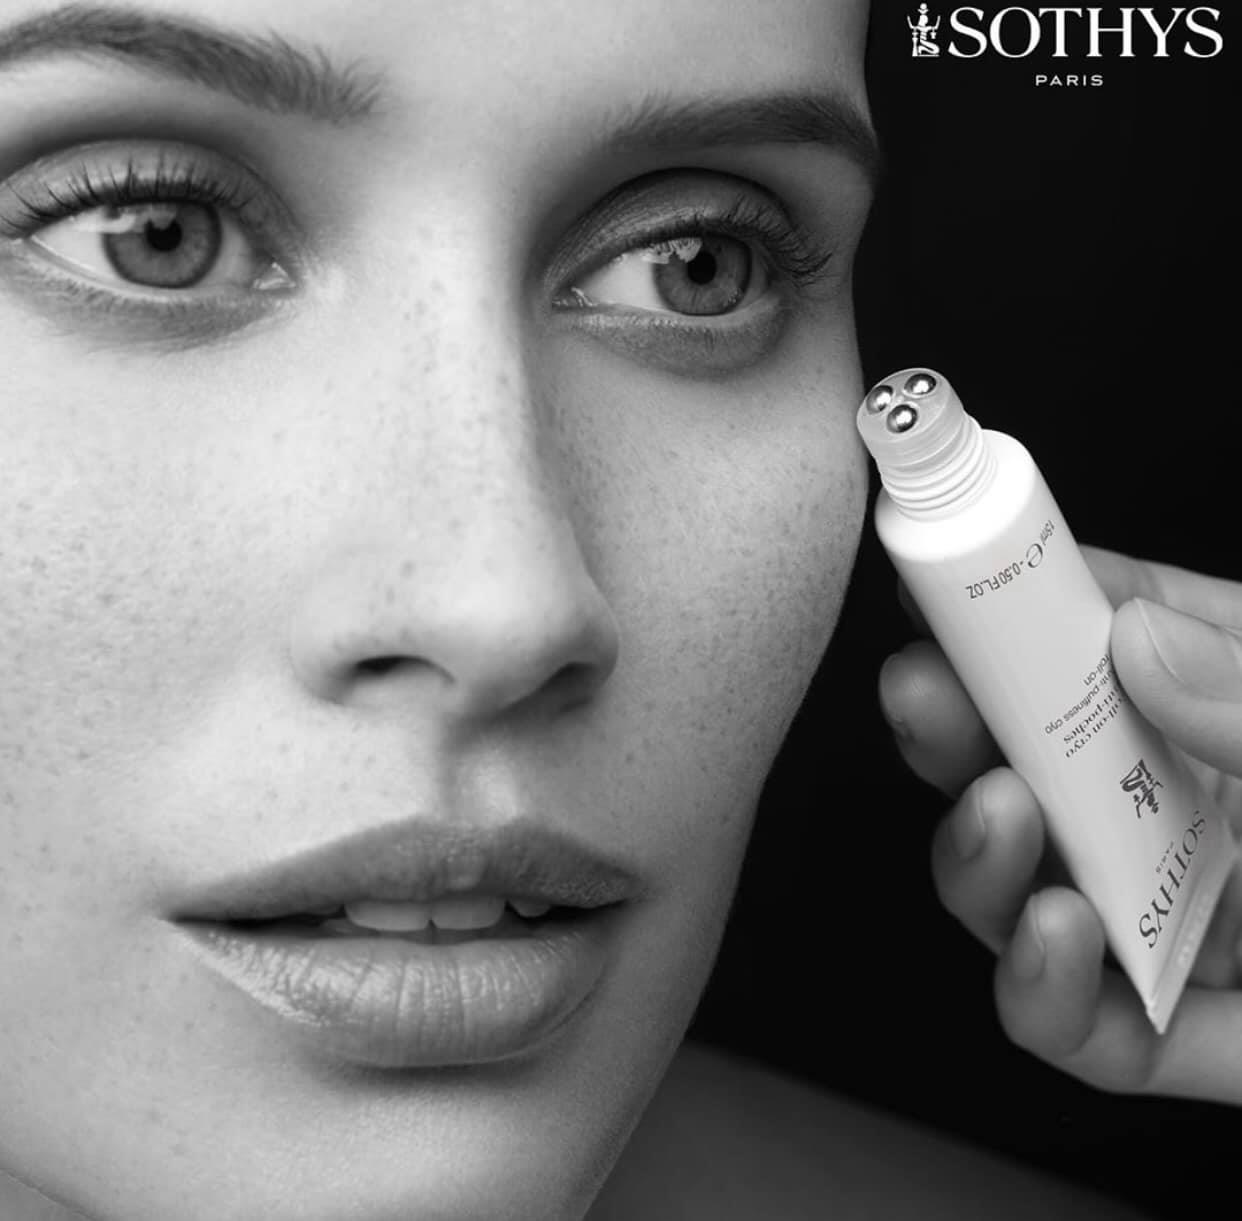 Sothys Sothys anti puffiness Cryo roll-on